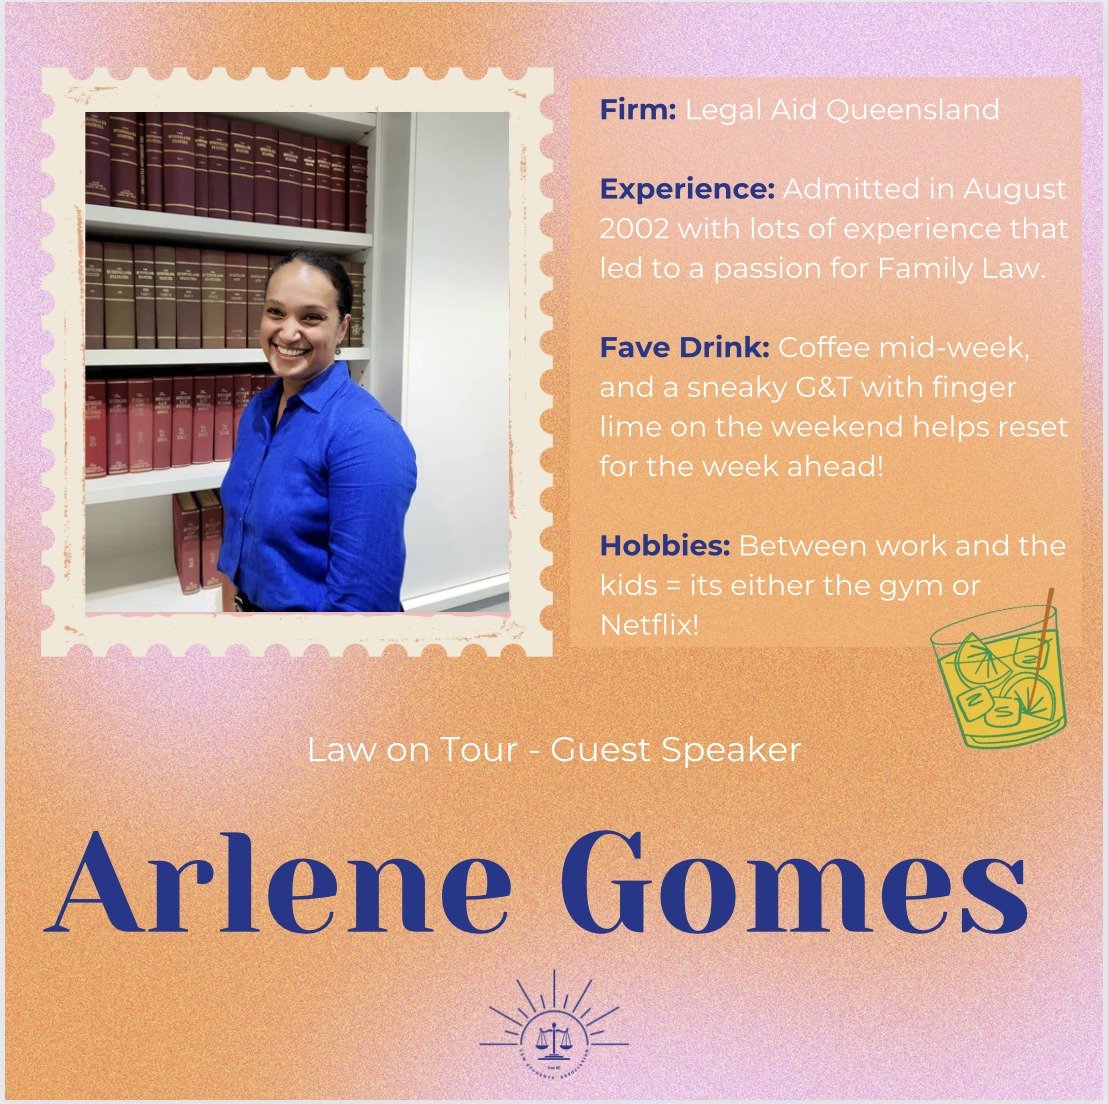 Do you know what area of law you&rsquo;re interested in? ⚖️

If not, grab your tickets to the Law on Tour event to chat to our fifth speaker, Arlene Gomes from Legal Aid Queensland. She has experience in many different areas of law and in doing so ha